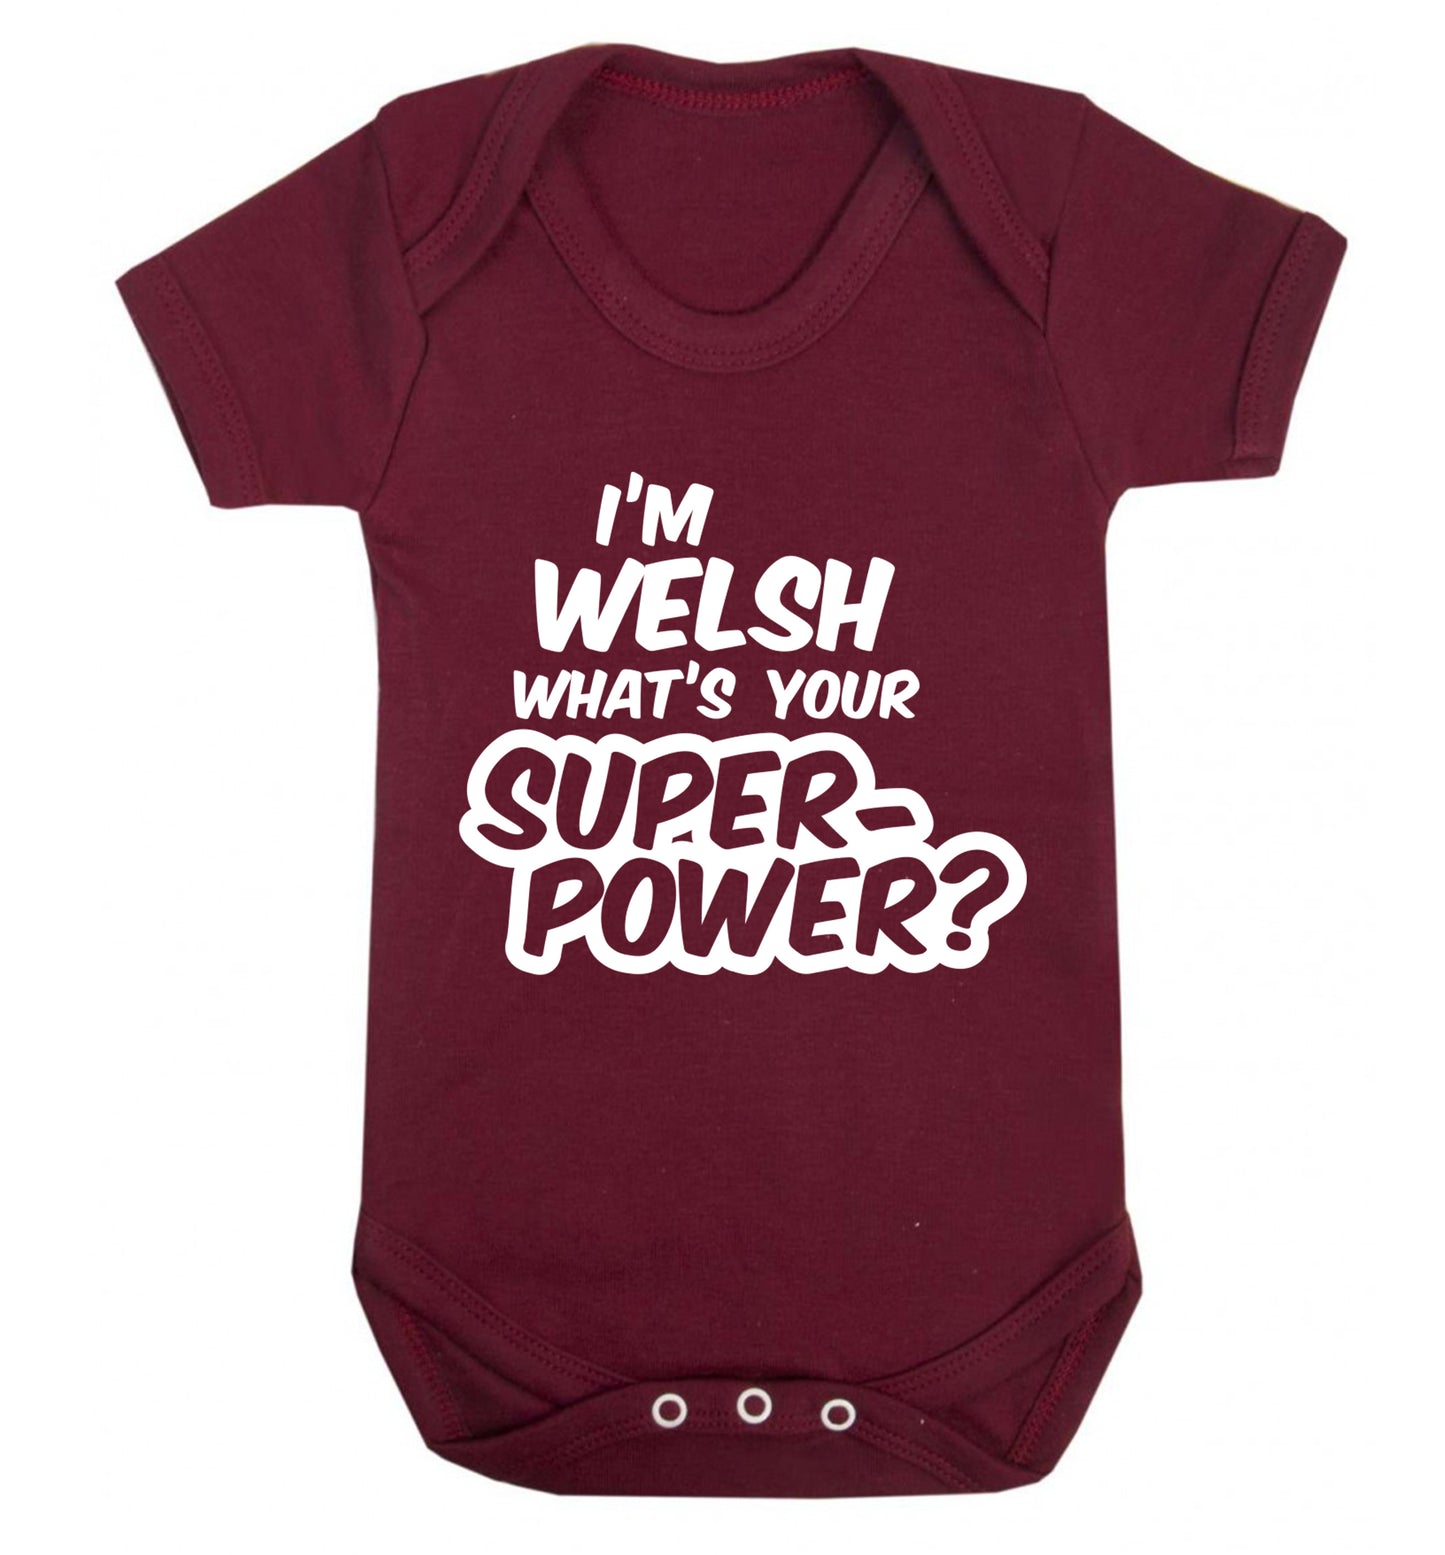 I'm Welsh what's your superpower? Baby Vest maroon 18-24 months